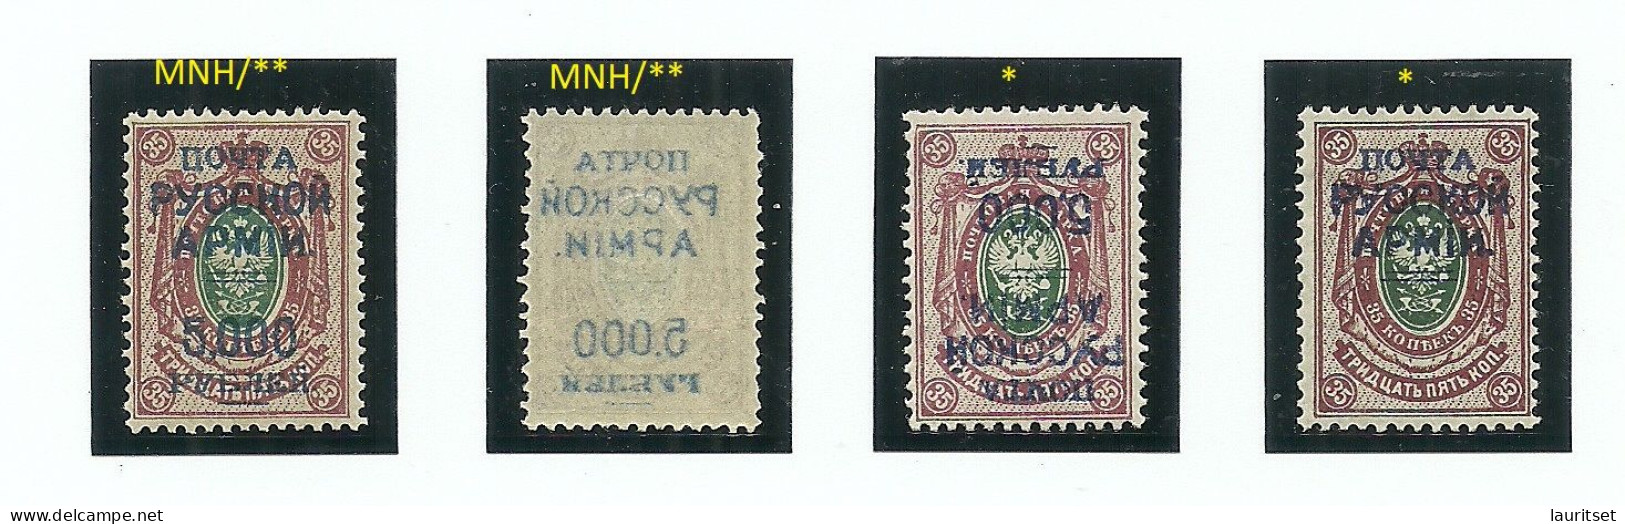 RUSSLAND RUSSIA 1920 Wrangel Army Gallipoli OPT MNH/MH : Normal + 3 Varieties (set Off & OPT Inverted + Partly Missing) - Armada Wrangel